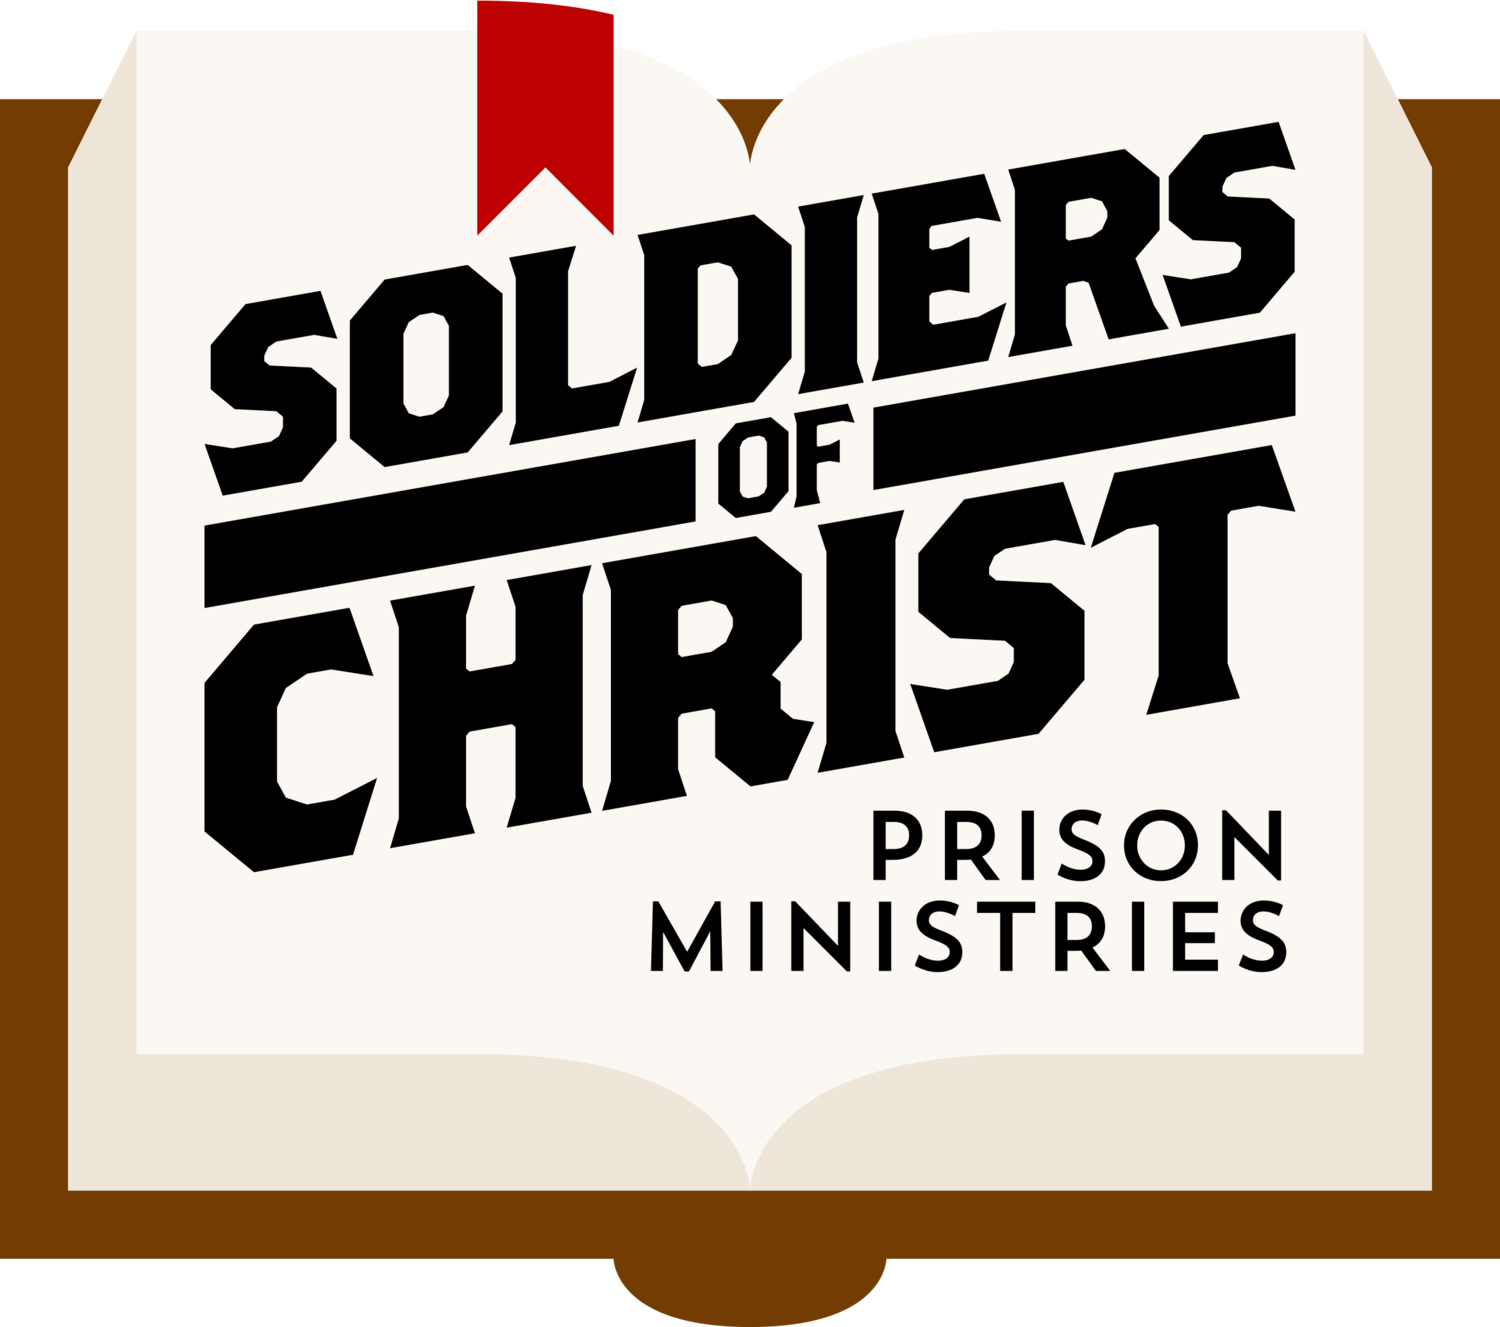 Soldiers of Christ Prison Ministries